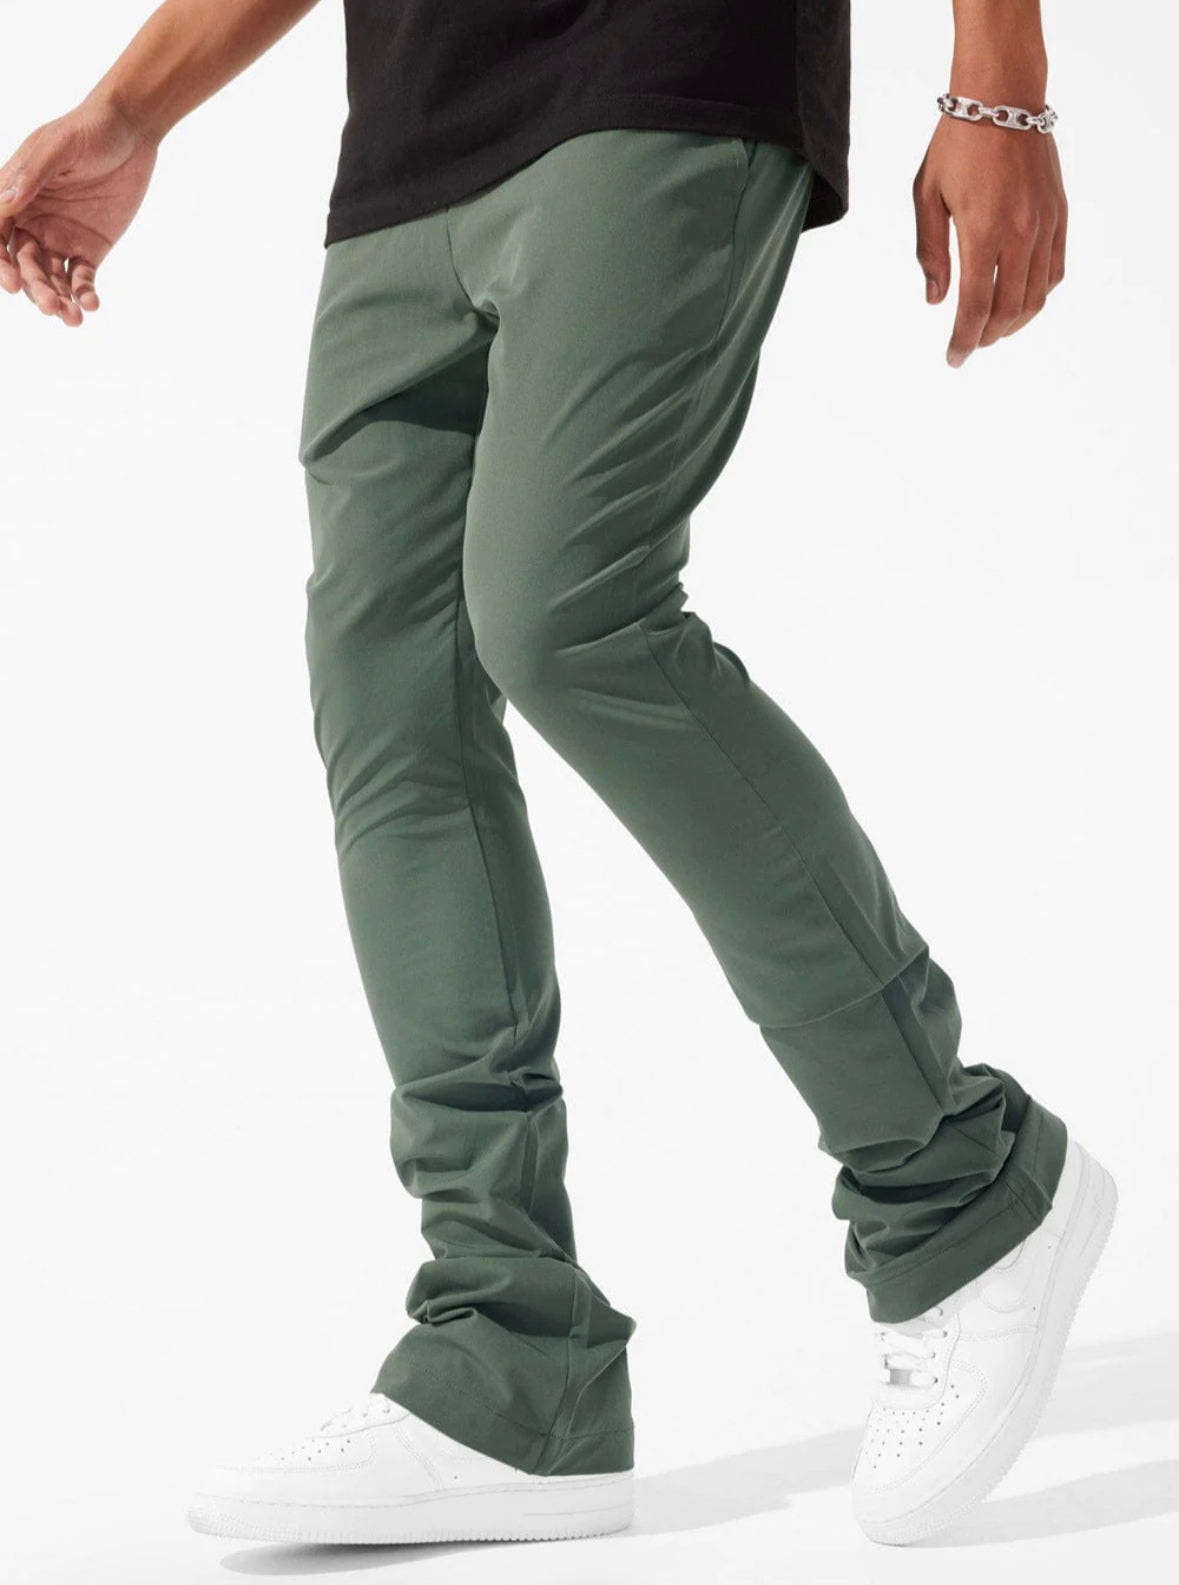 JC Stacked Bali Athletic Pants Olive 8831L